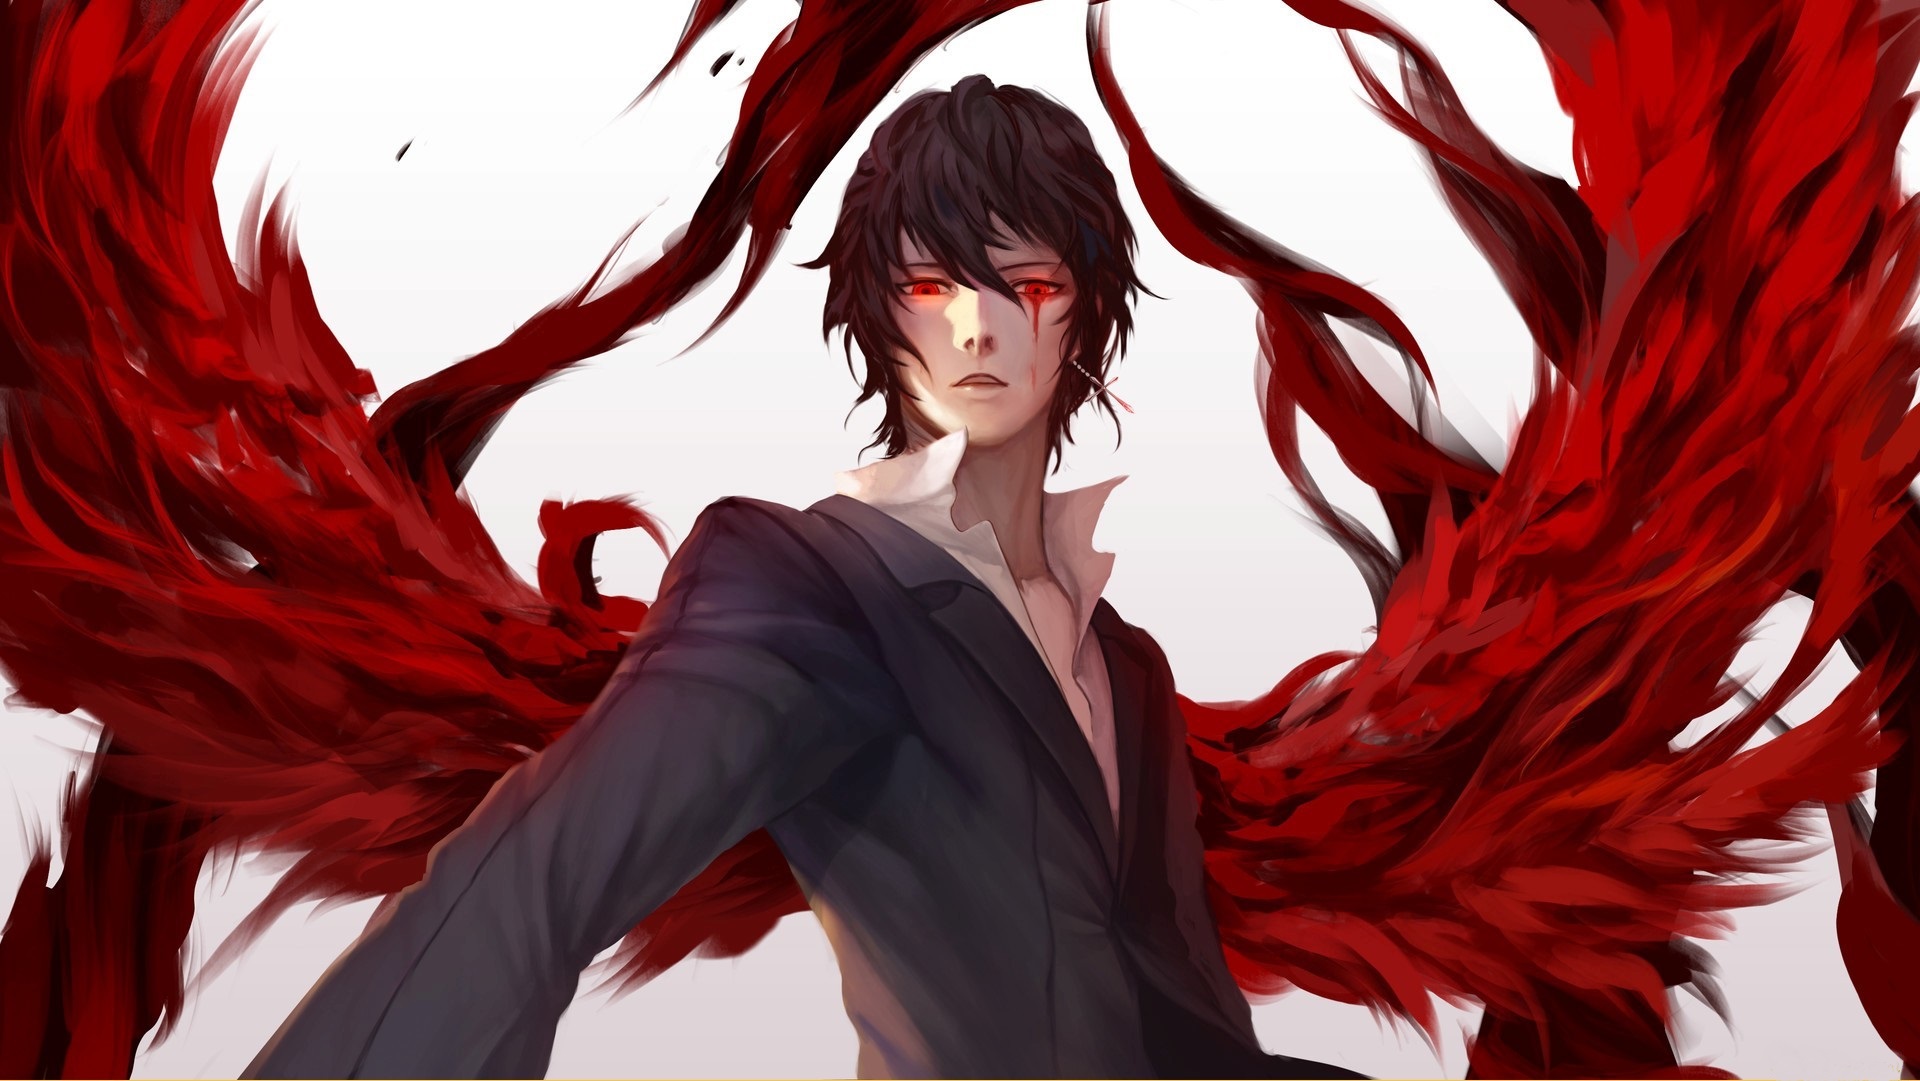 Anime Noblesse HD Wallpaper | Background Image